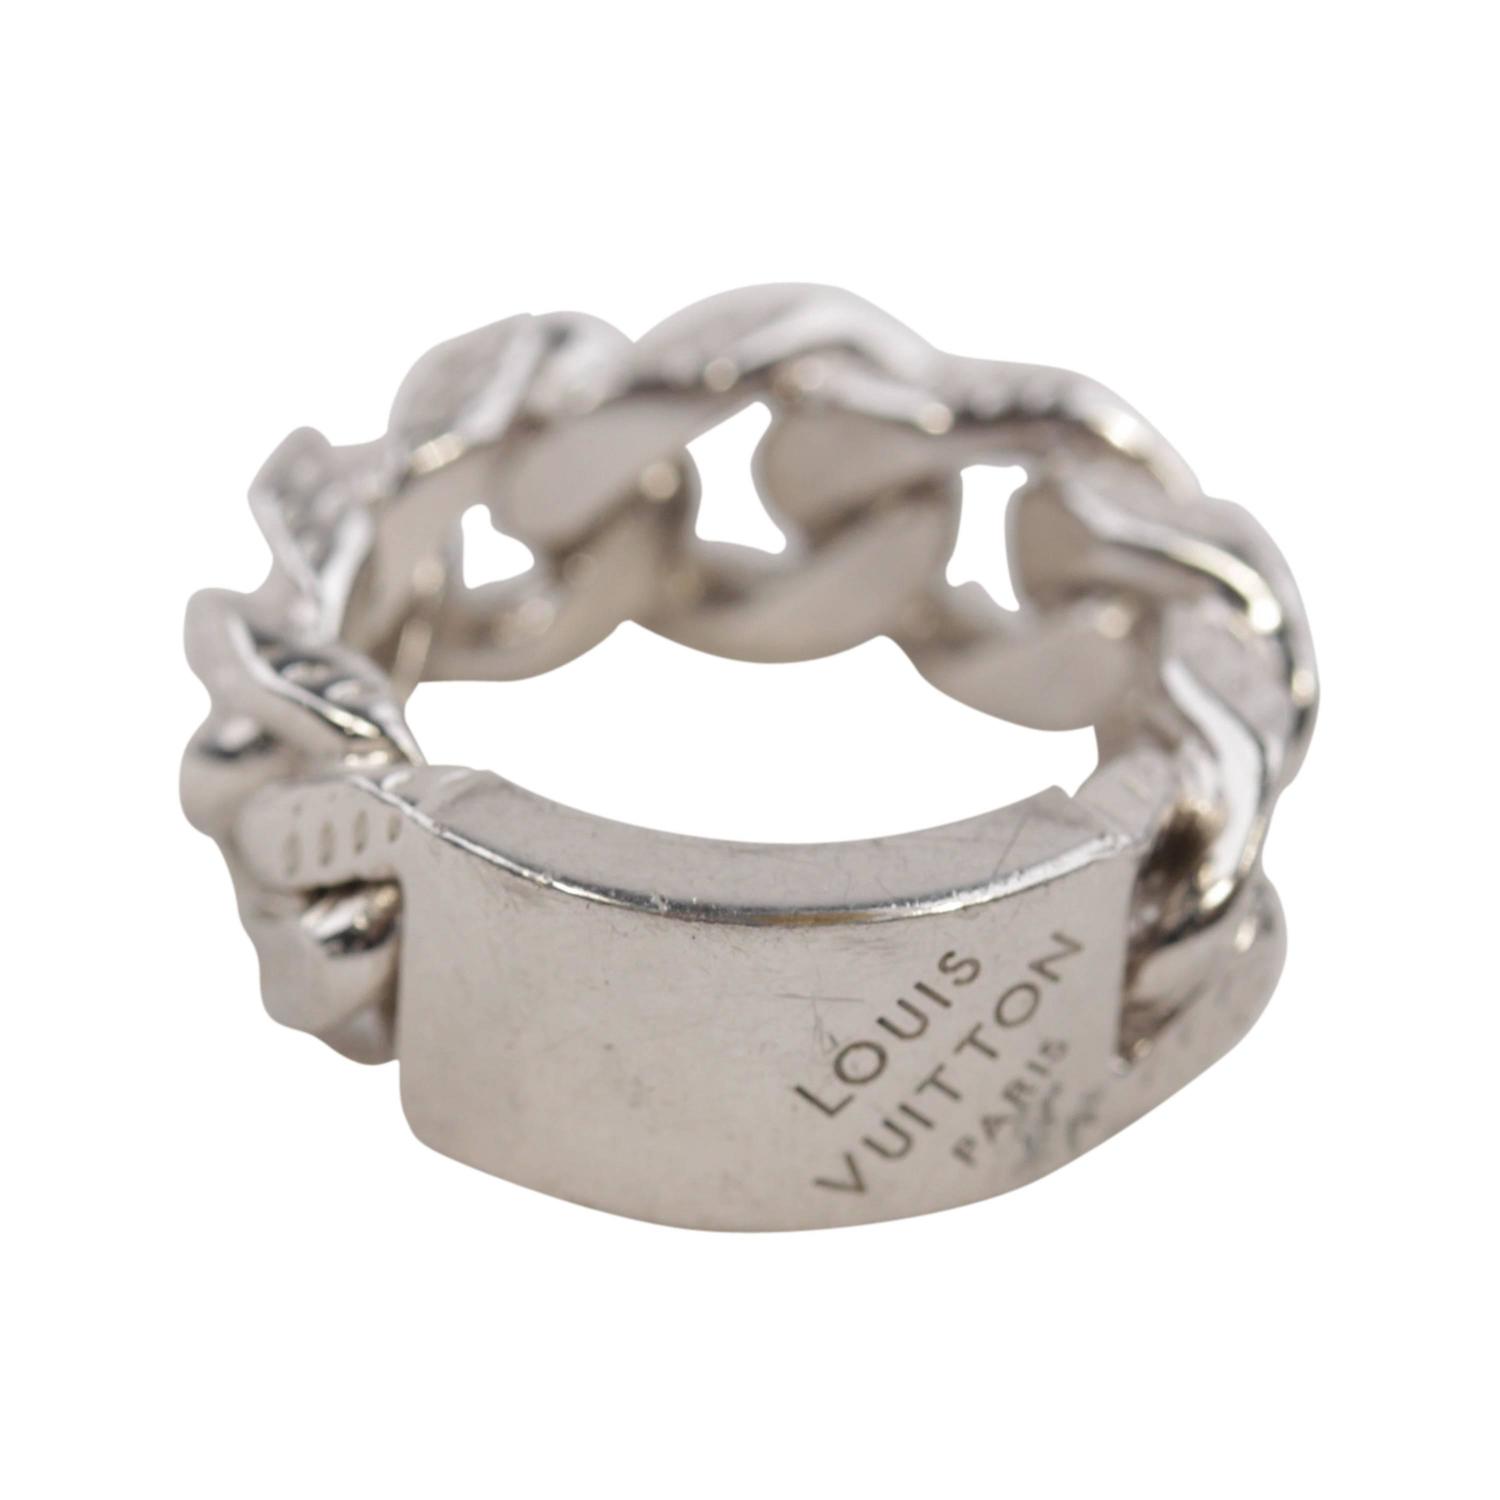 LOUIS VUITTON Silver Plated MONTAIGNE MEN RING Band Size M at 1stdibs